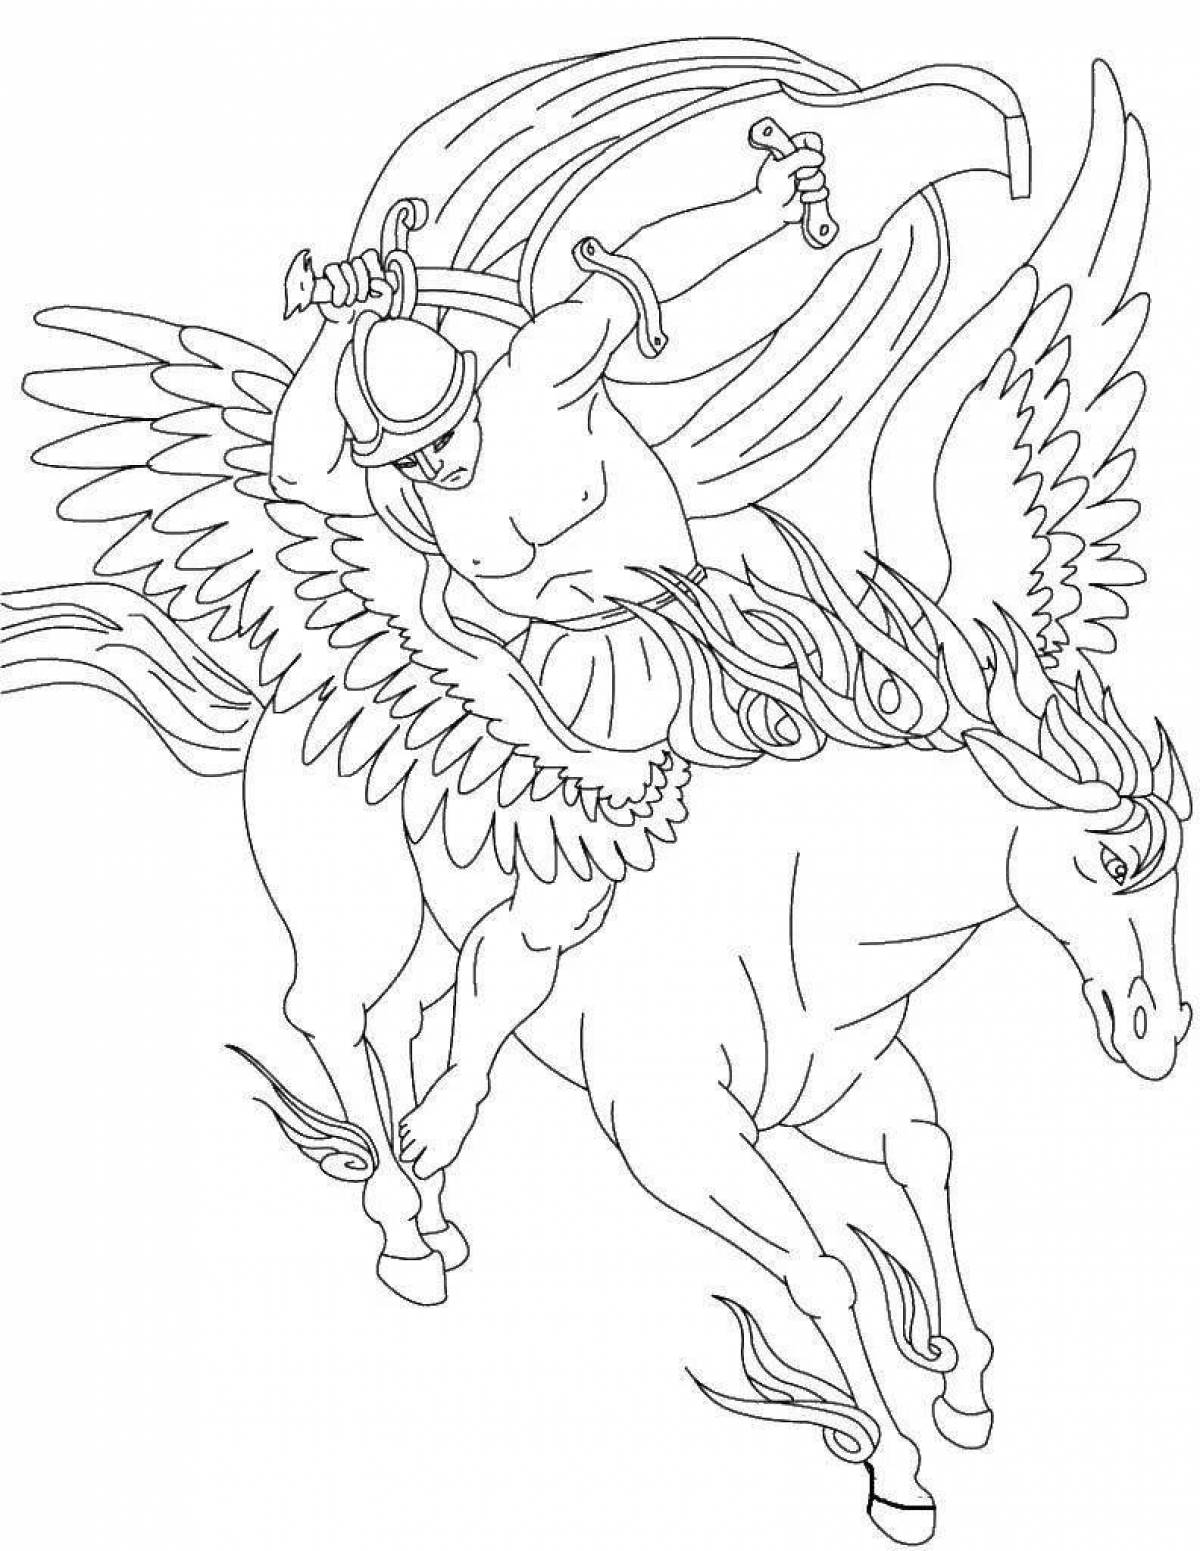 Violent coloring horse with wings